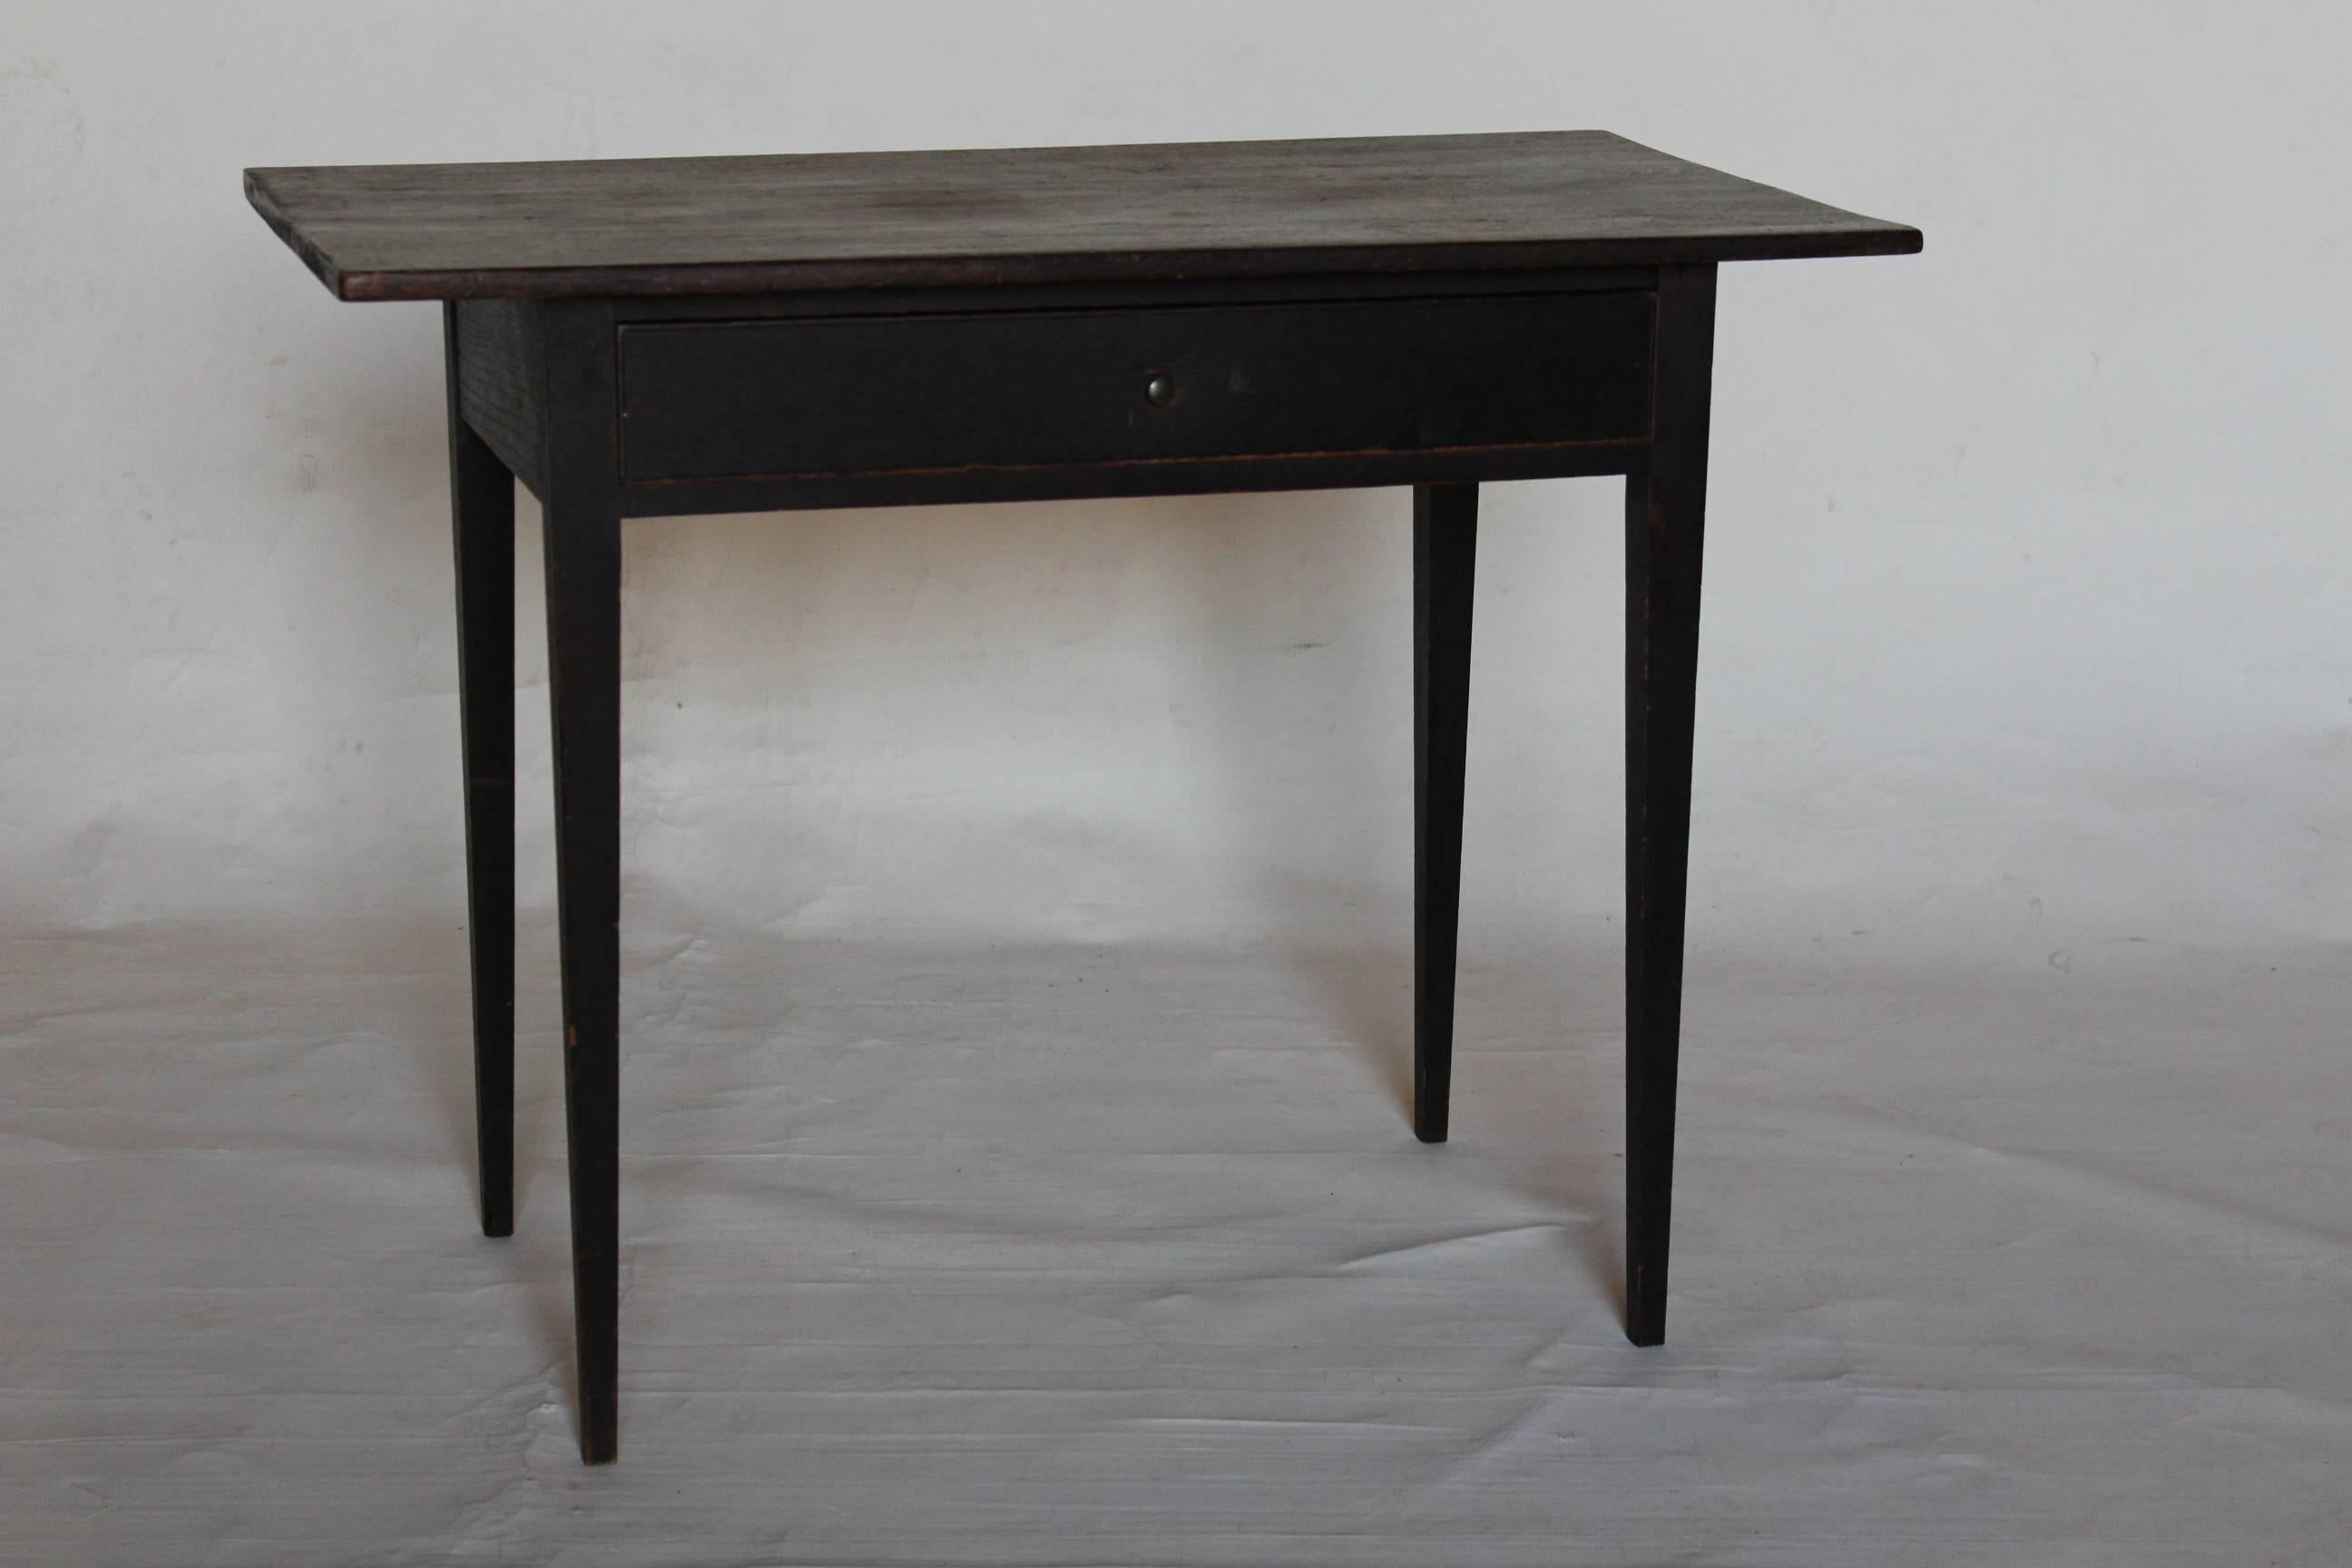 A charming walnut and pine single-drawer table with an early, perhaps original, black-painted finish. This table was likely made in Pennsylvania, circa 1820. Its size and proportions make it an ideal side table or small desk.

Measures: Ht 27 ½’,